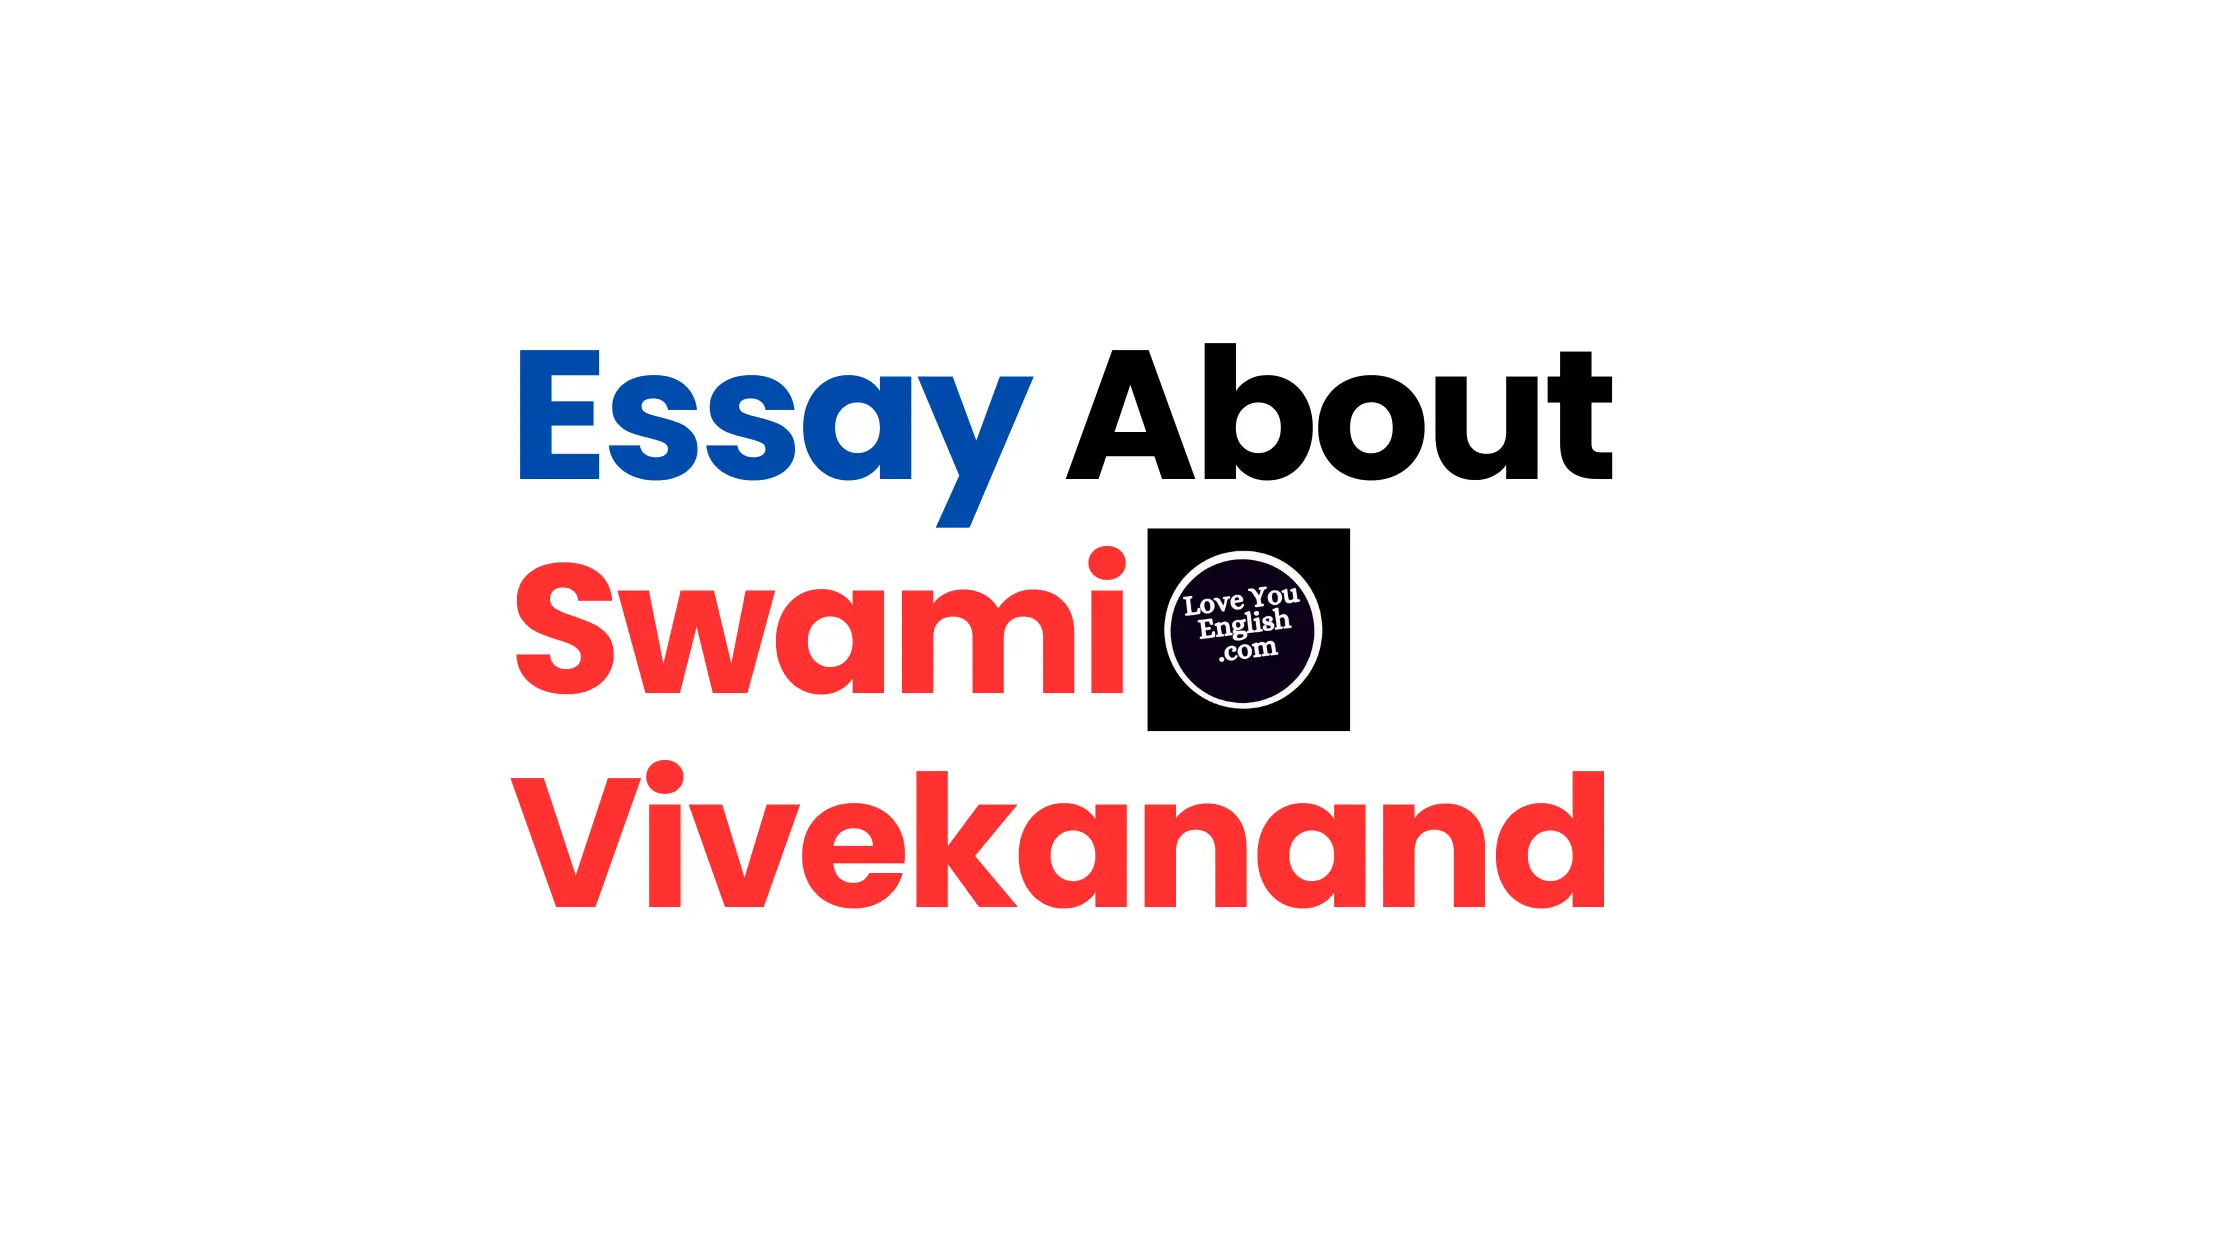 Essay About Swami Vivekanand